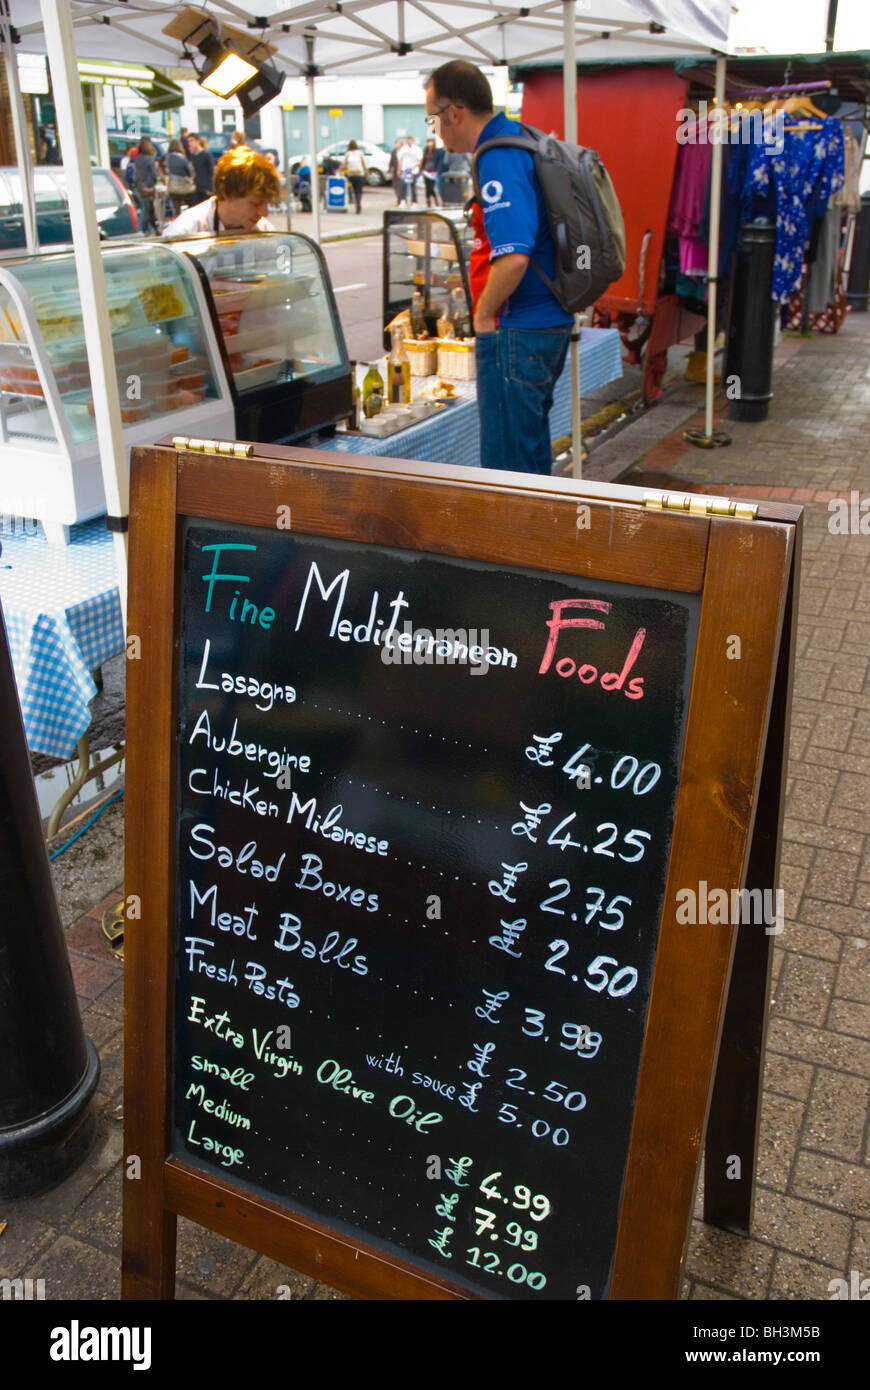 Stall selling Mediterranean foods Northcote Road Wandsworth South London England UK Europe Stock Photo